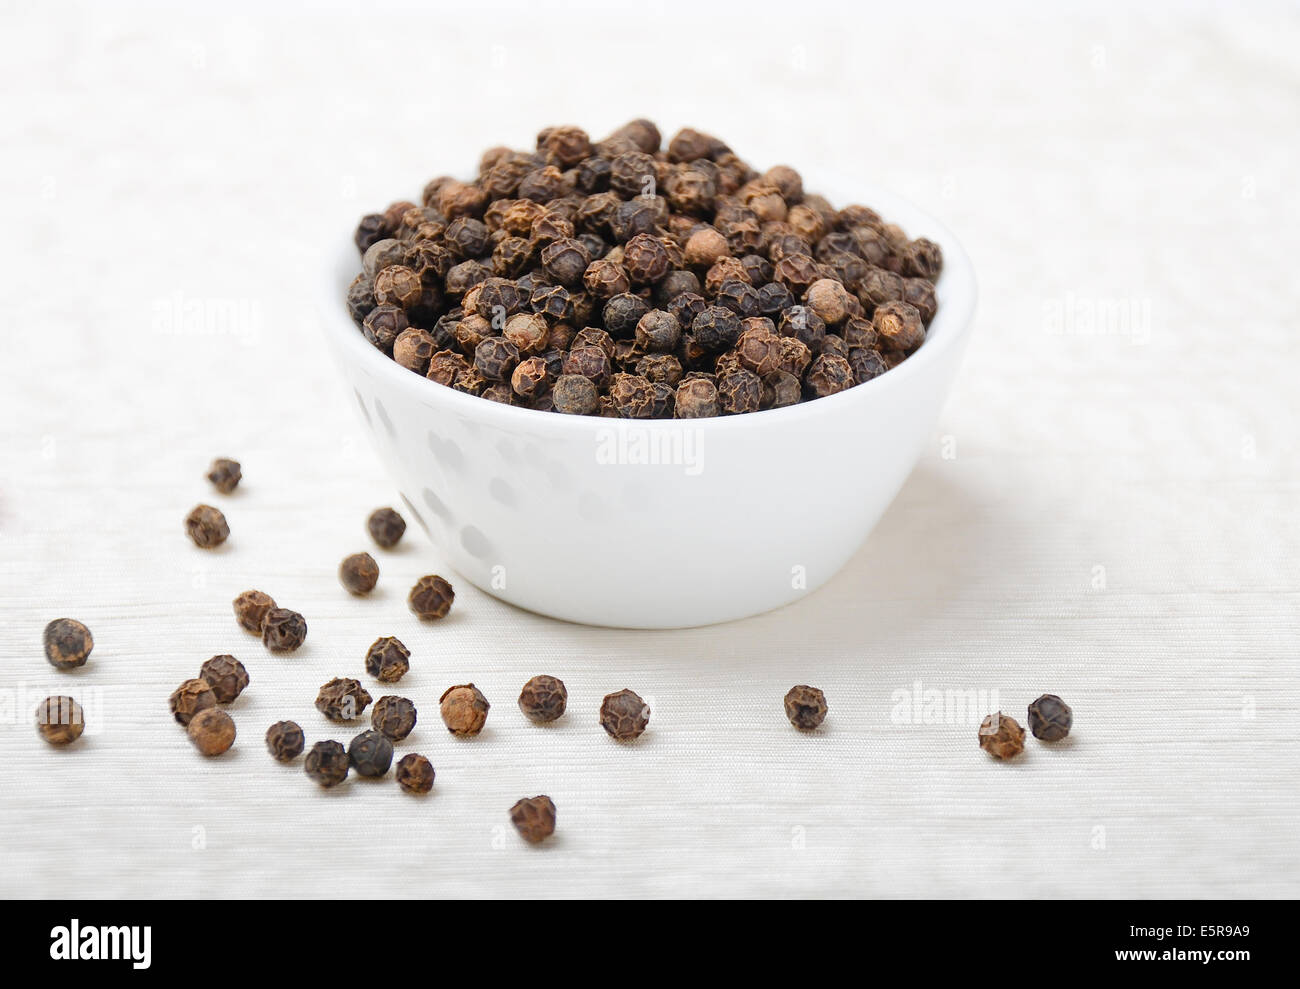 Black Pepper - Dried black peppercorns in a white porcelain bowl on white textile made of linen. Stock Photo